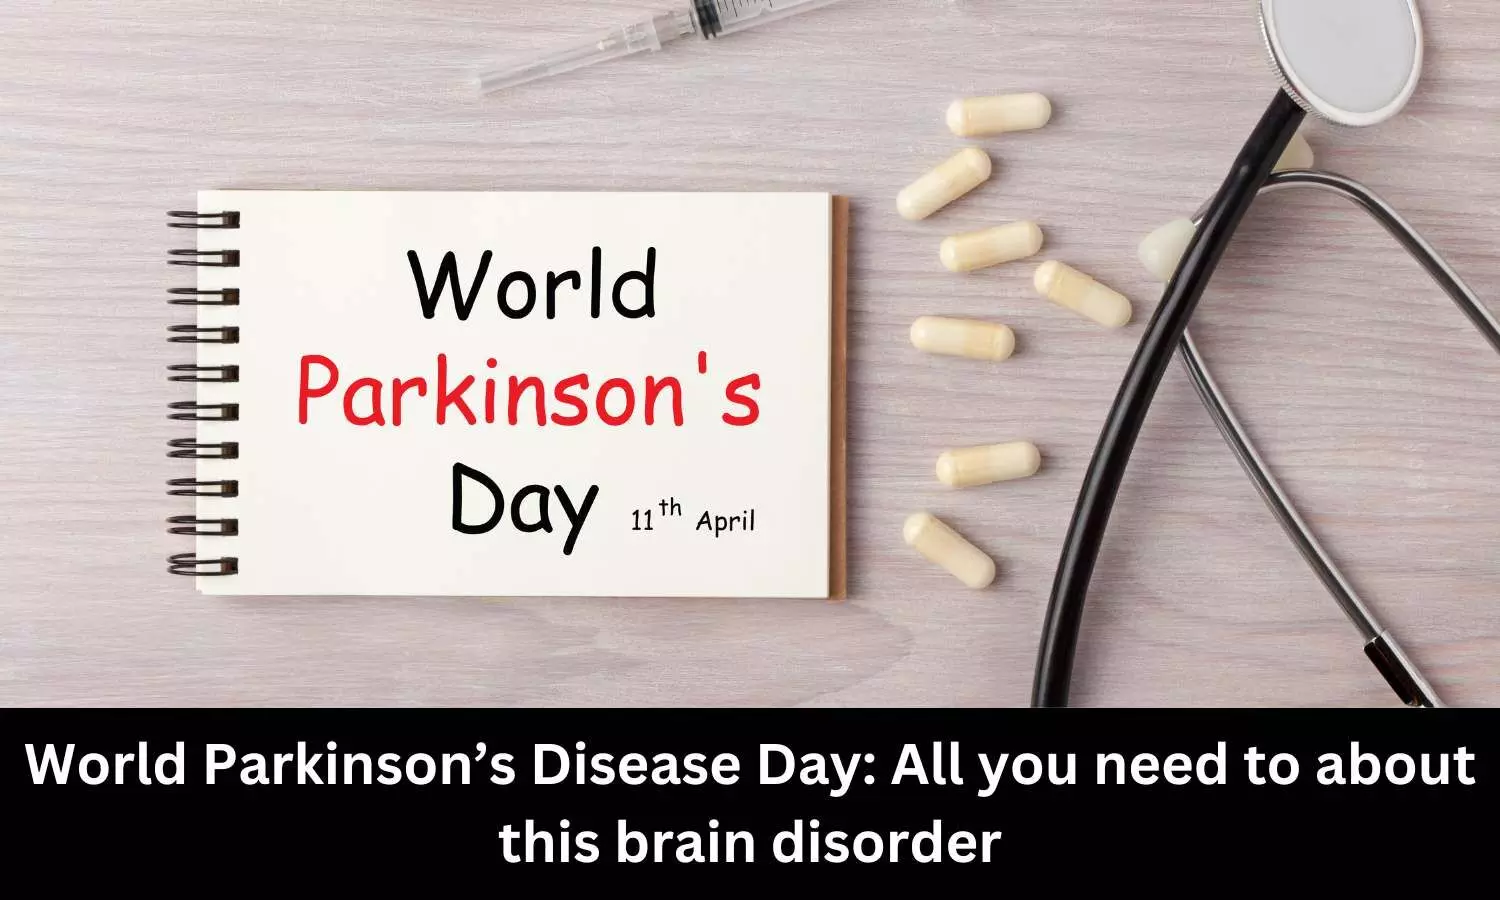 World Parkinson’s Disease Day: All you need to about this brain disorder